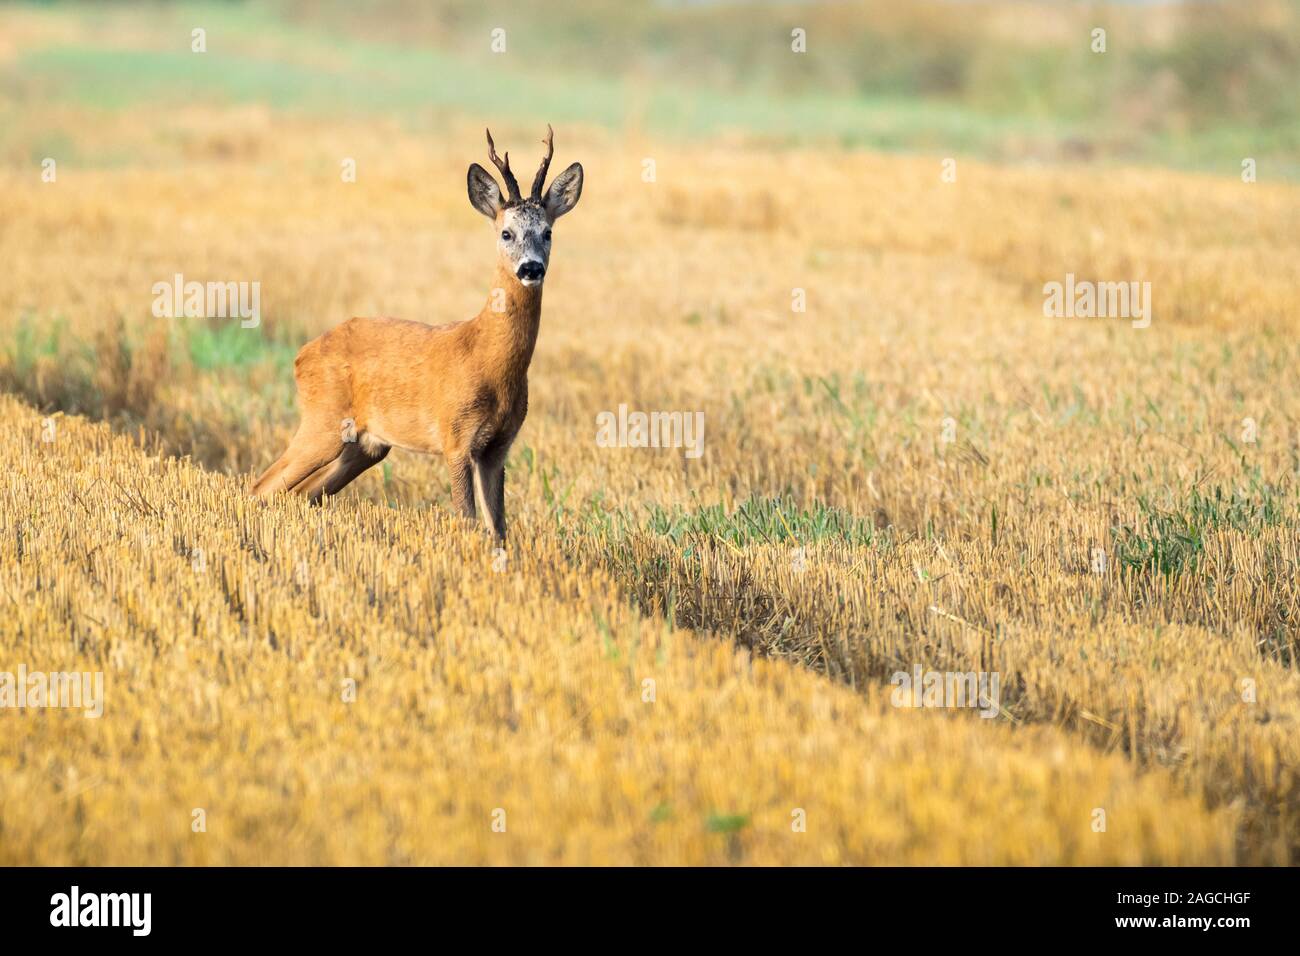 European roe deer (capreolus capreolus) standing in a rut among mown grain in the stubble in the light of the rising sun, Poland Stock Photo